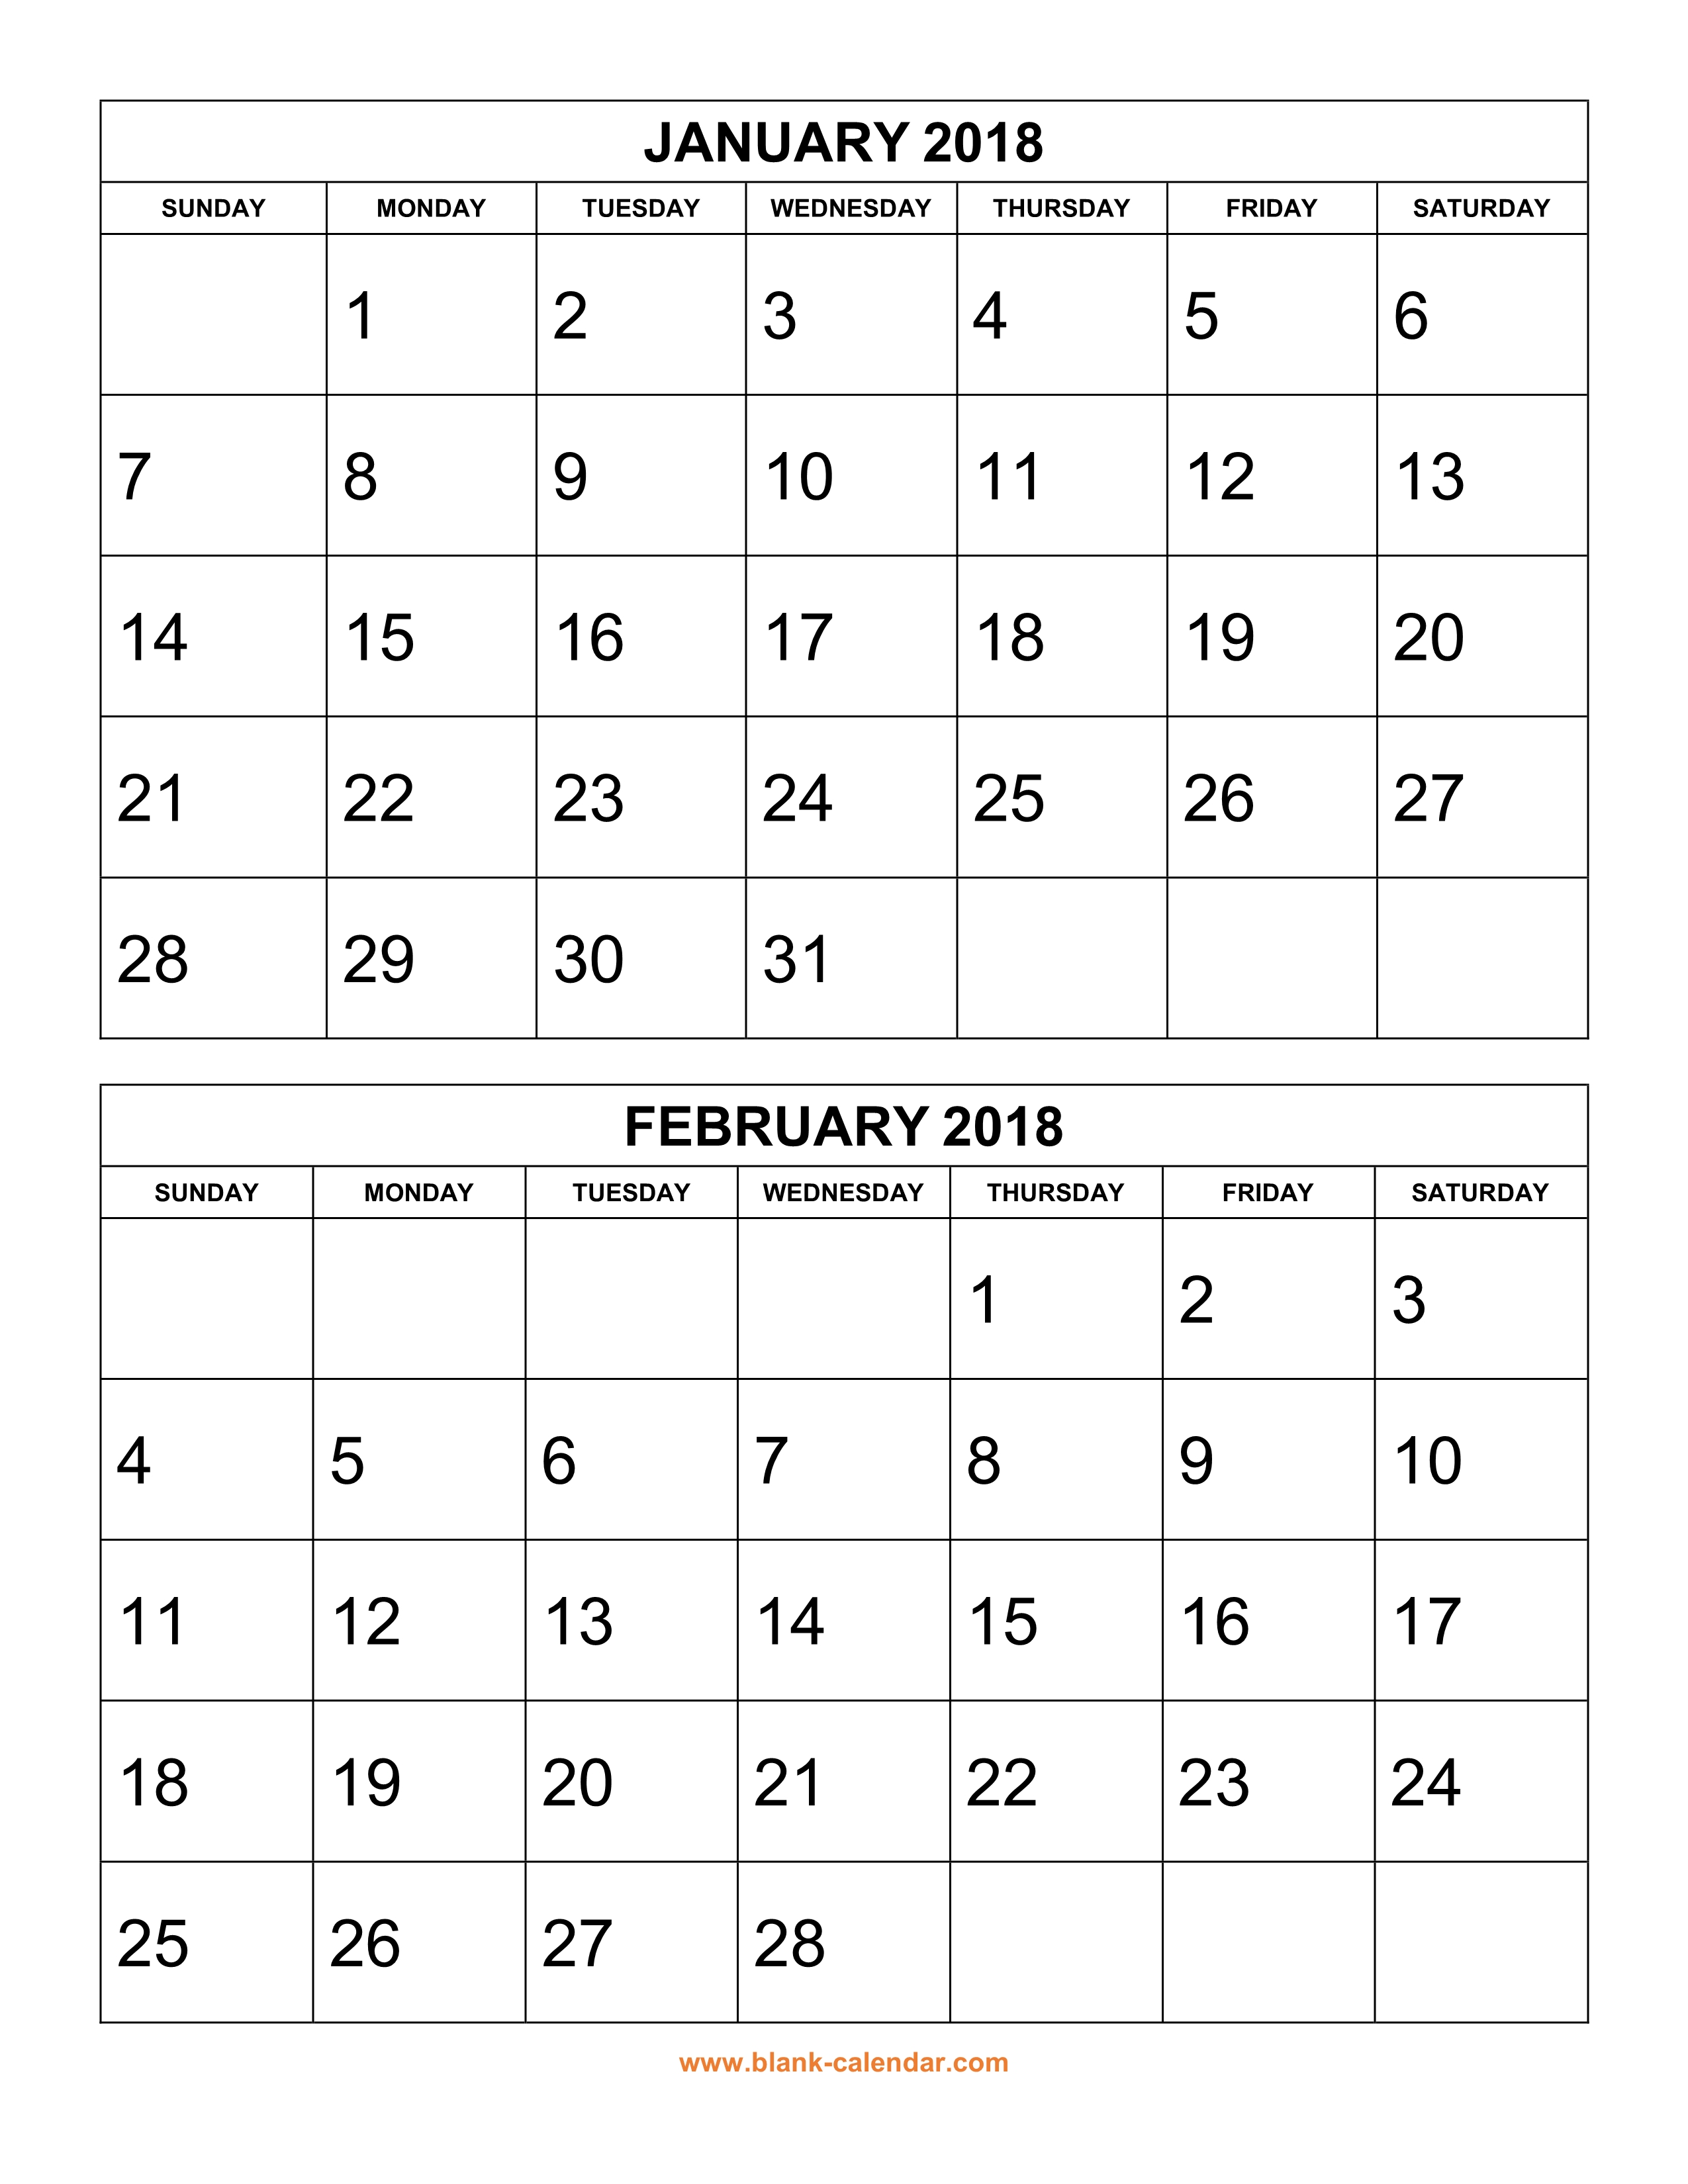 free-download-printable-calendar-2018-2-months-per-page-6-pages